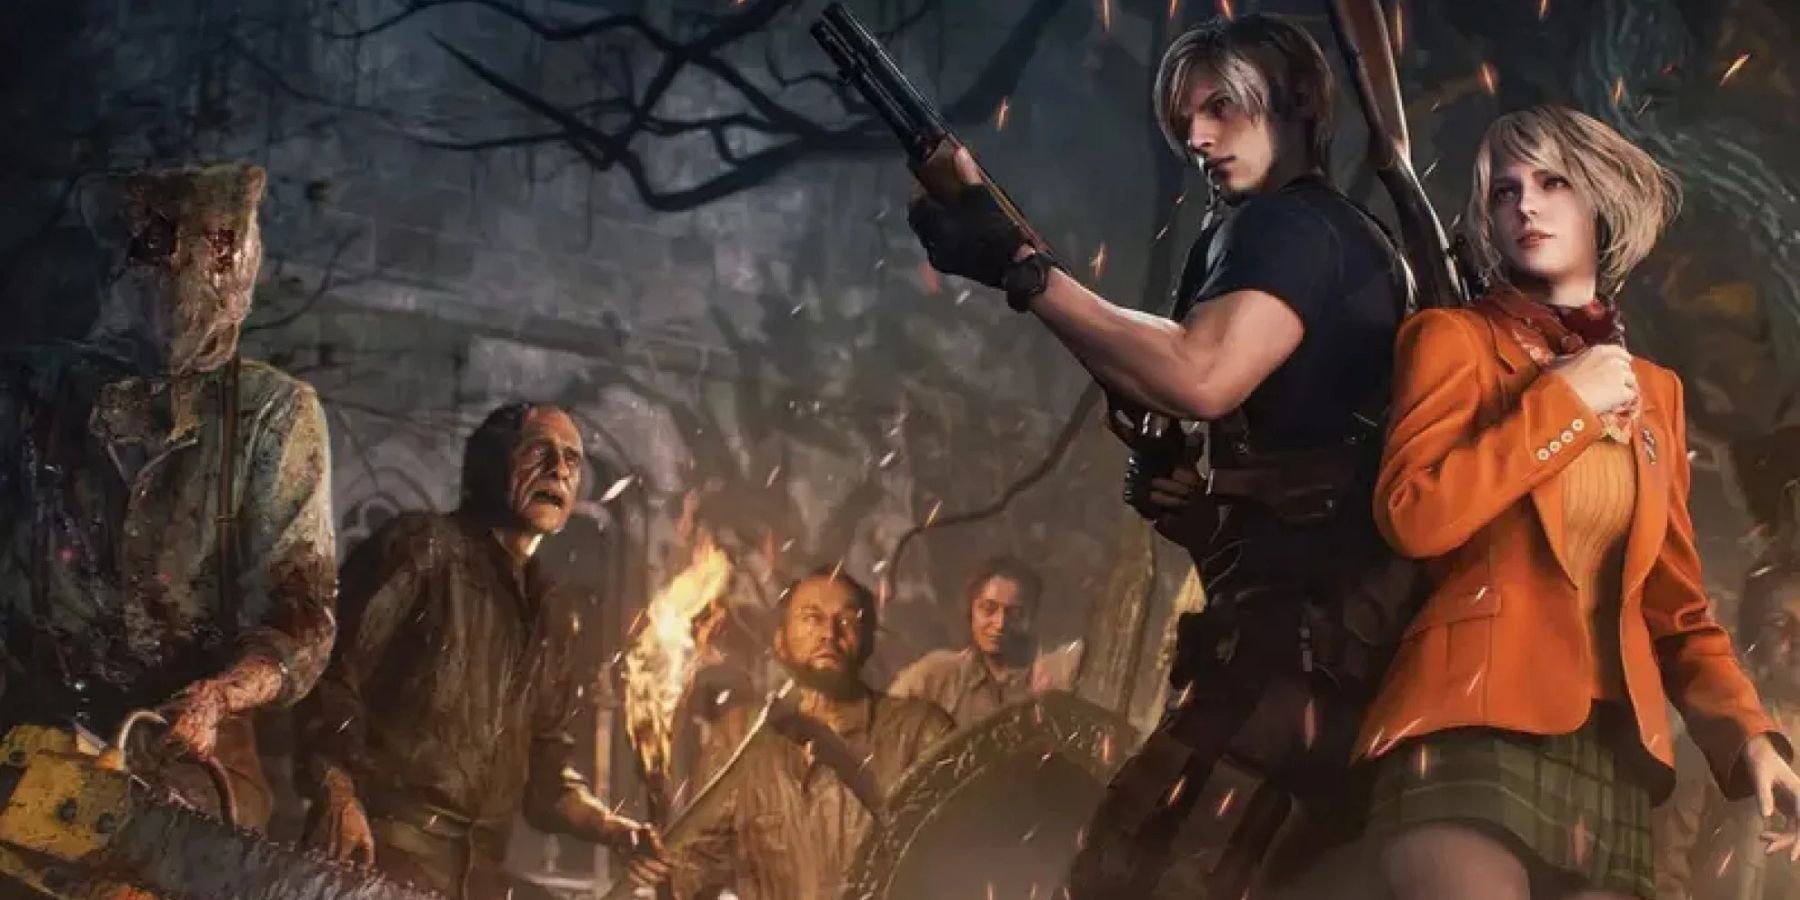 resident-evil-4-remake-fans-happy-enemy-cut-from-game-commandos